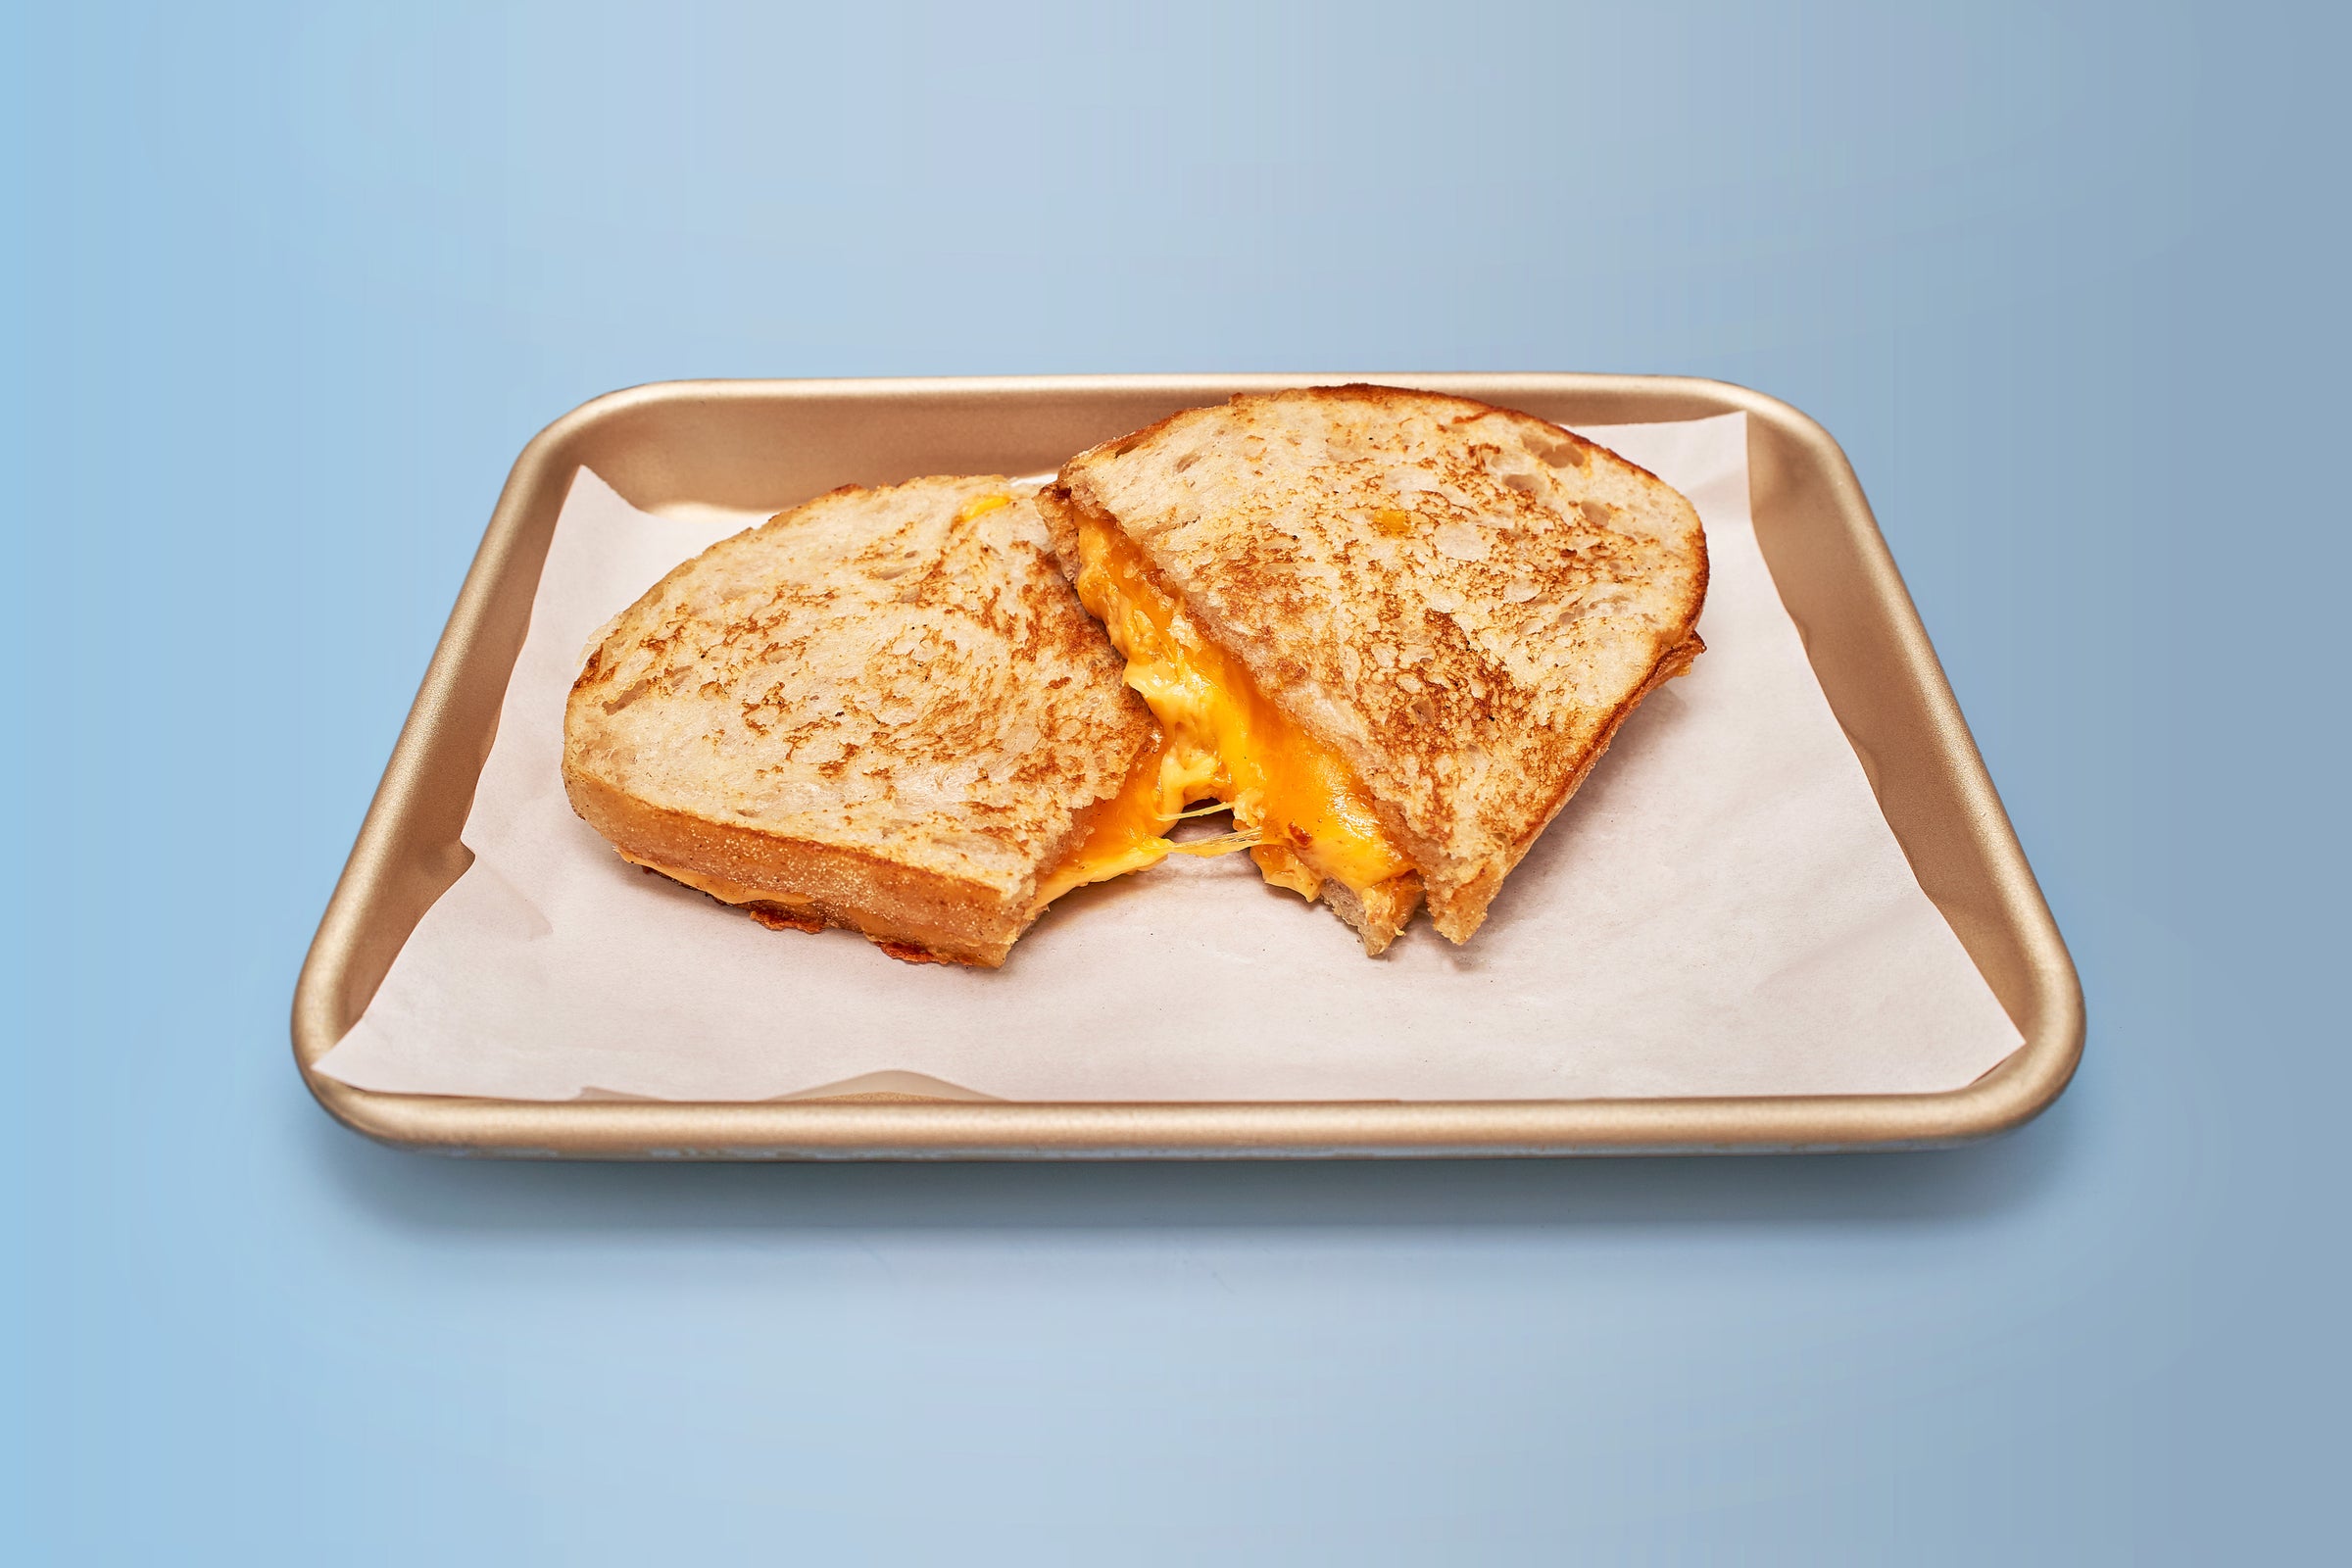 How to -The perfect grilled cheese sandwich